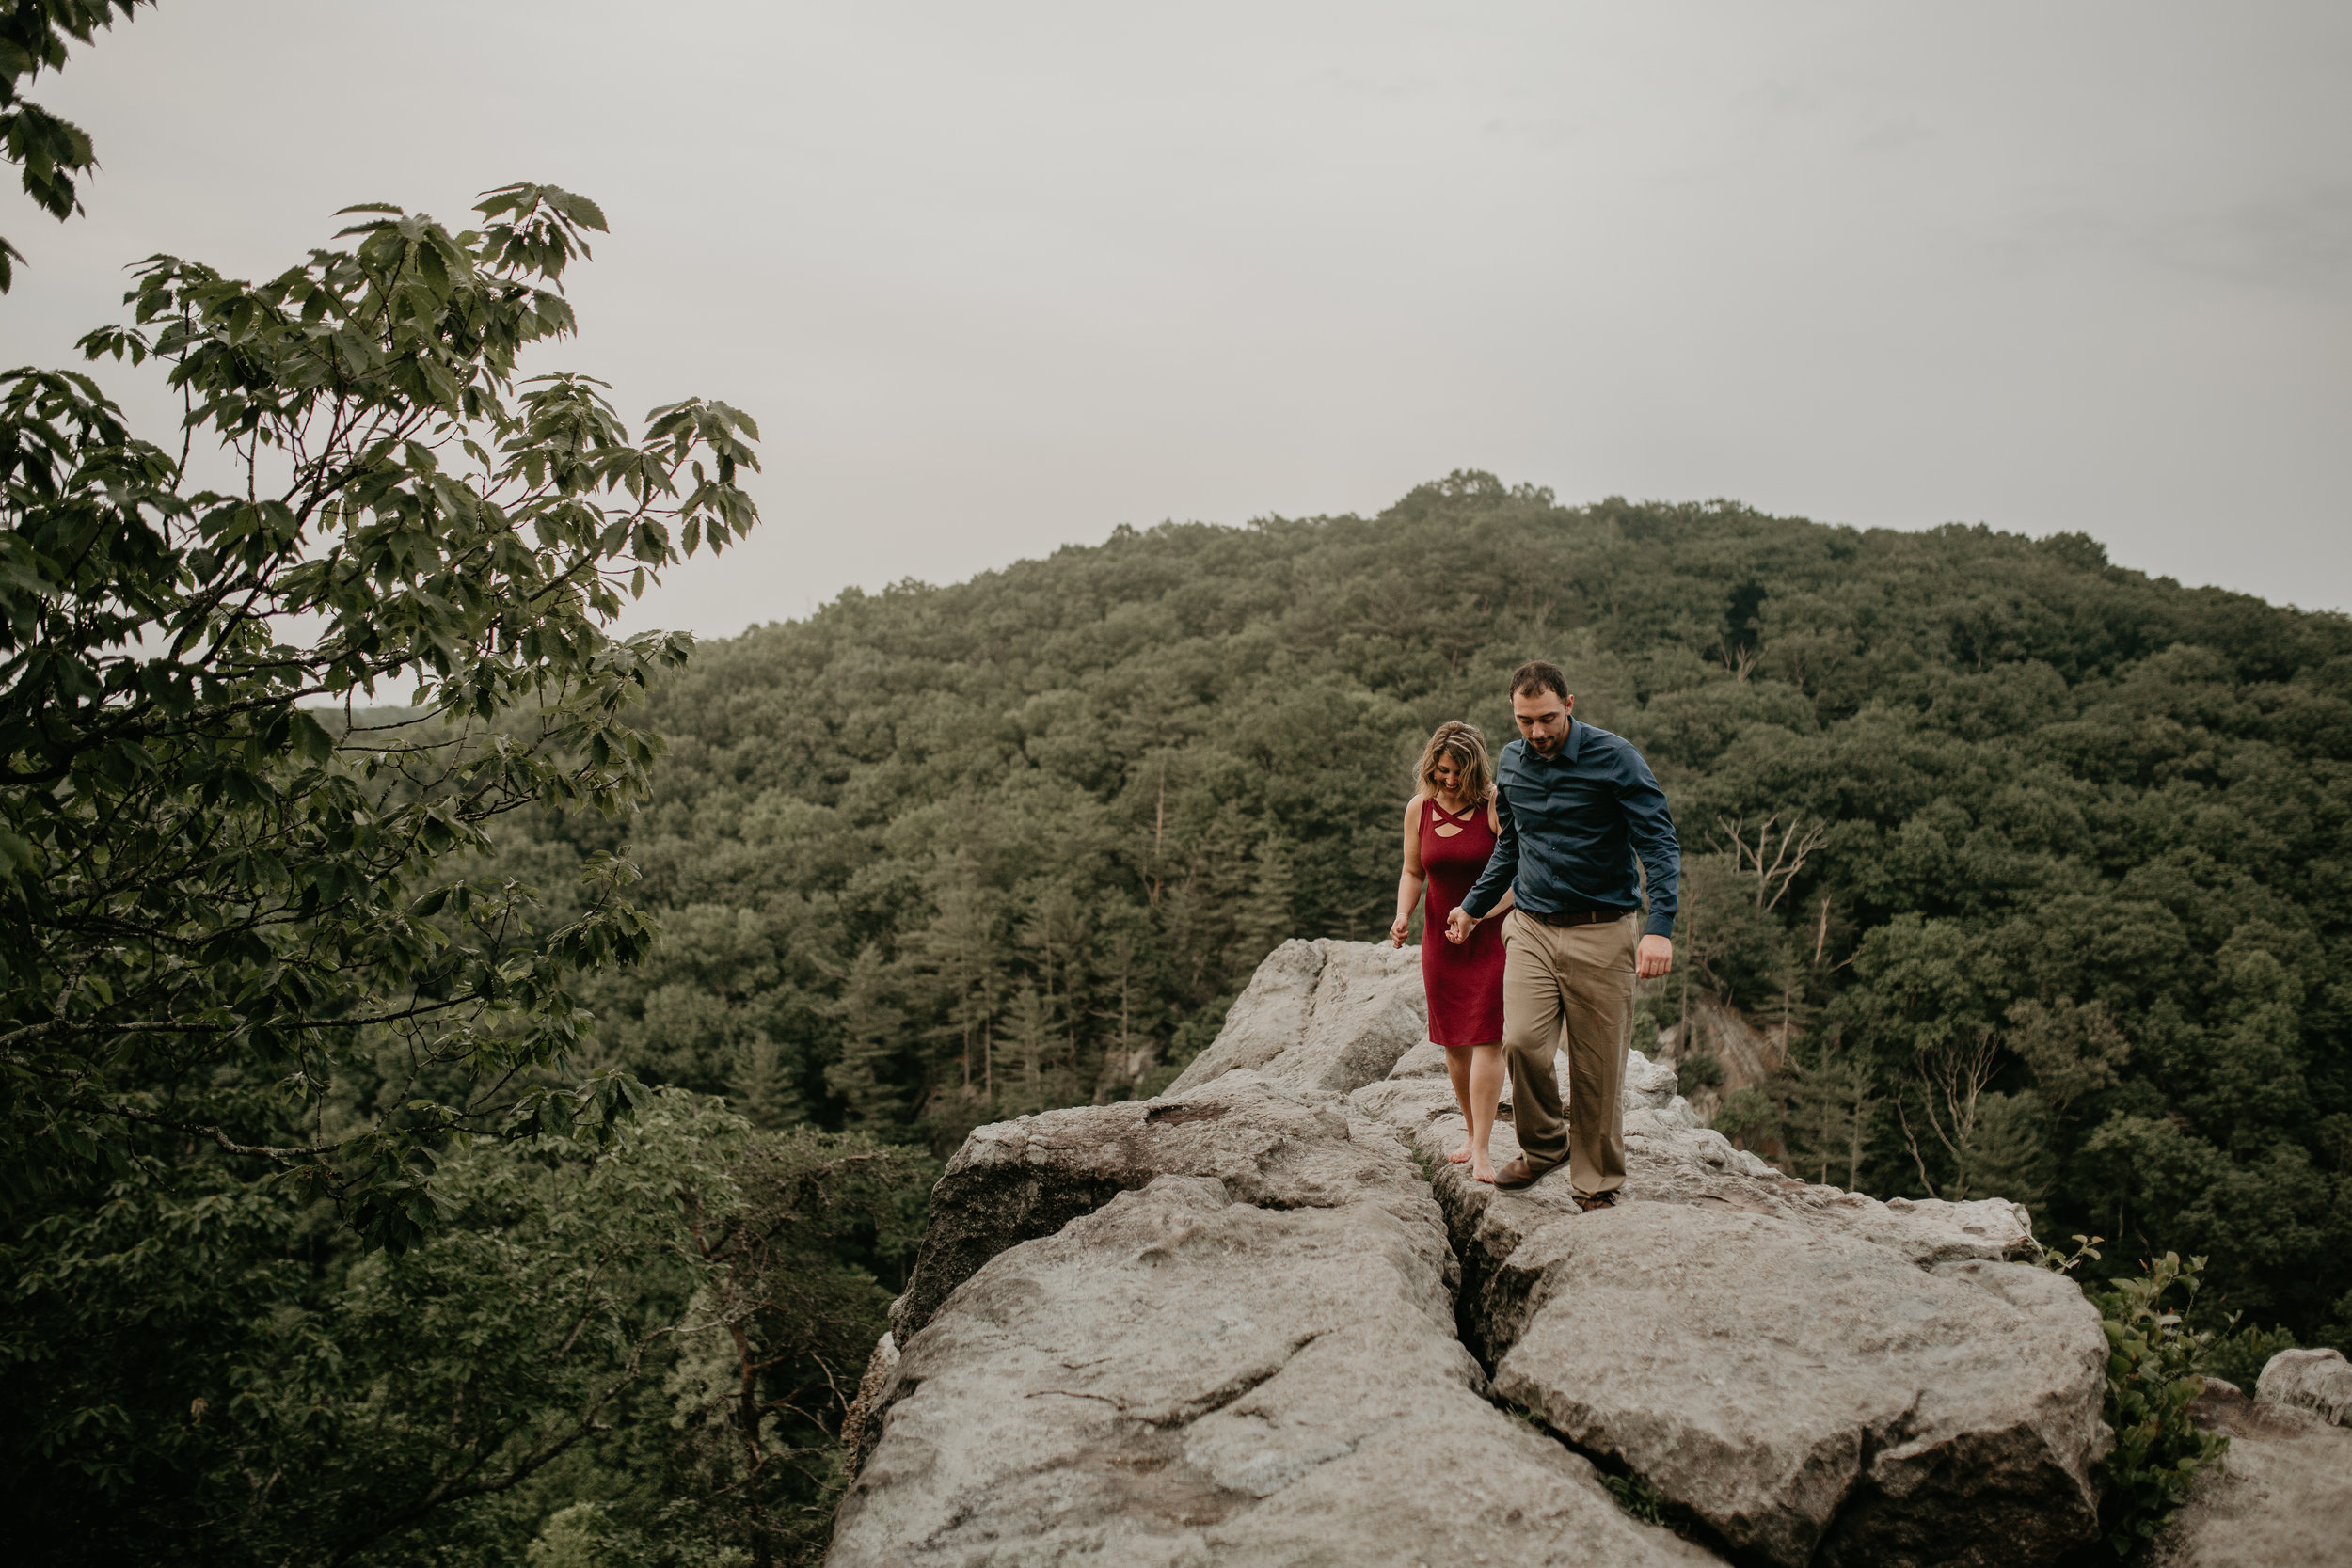 Nicole-Daacke-Photography-rock-state-park-overlook-king-queen-seat-maryland-hiking-adventure-engagement-session-photos-portraits-summer-bel-air-dog-engagement-session-37.jpg